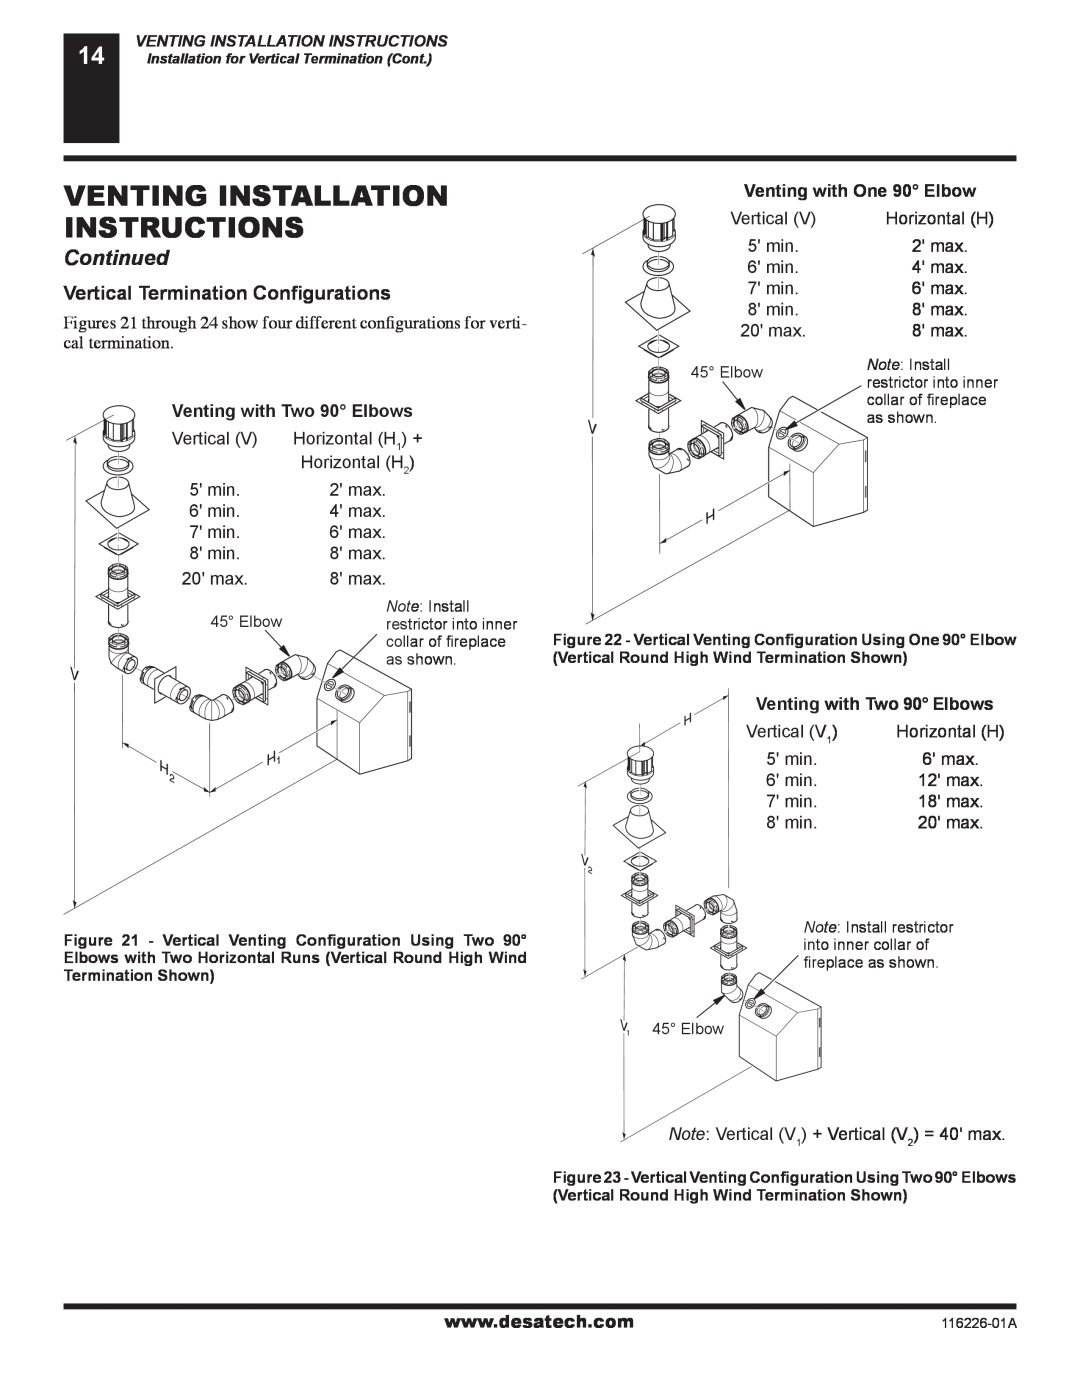 Desa (V)KC36N Vertical Termination Conﬁgurations, Venting Installation Instructions, Continued, Venting with Two 90 Elbows 